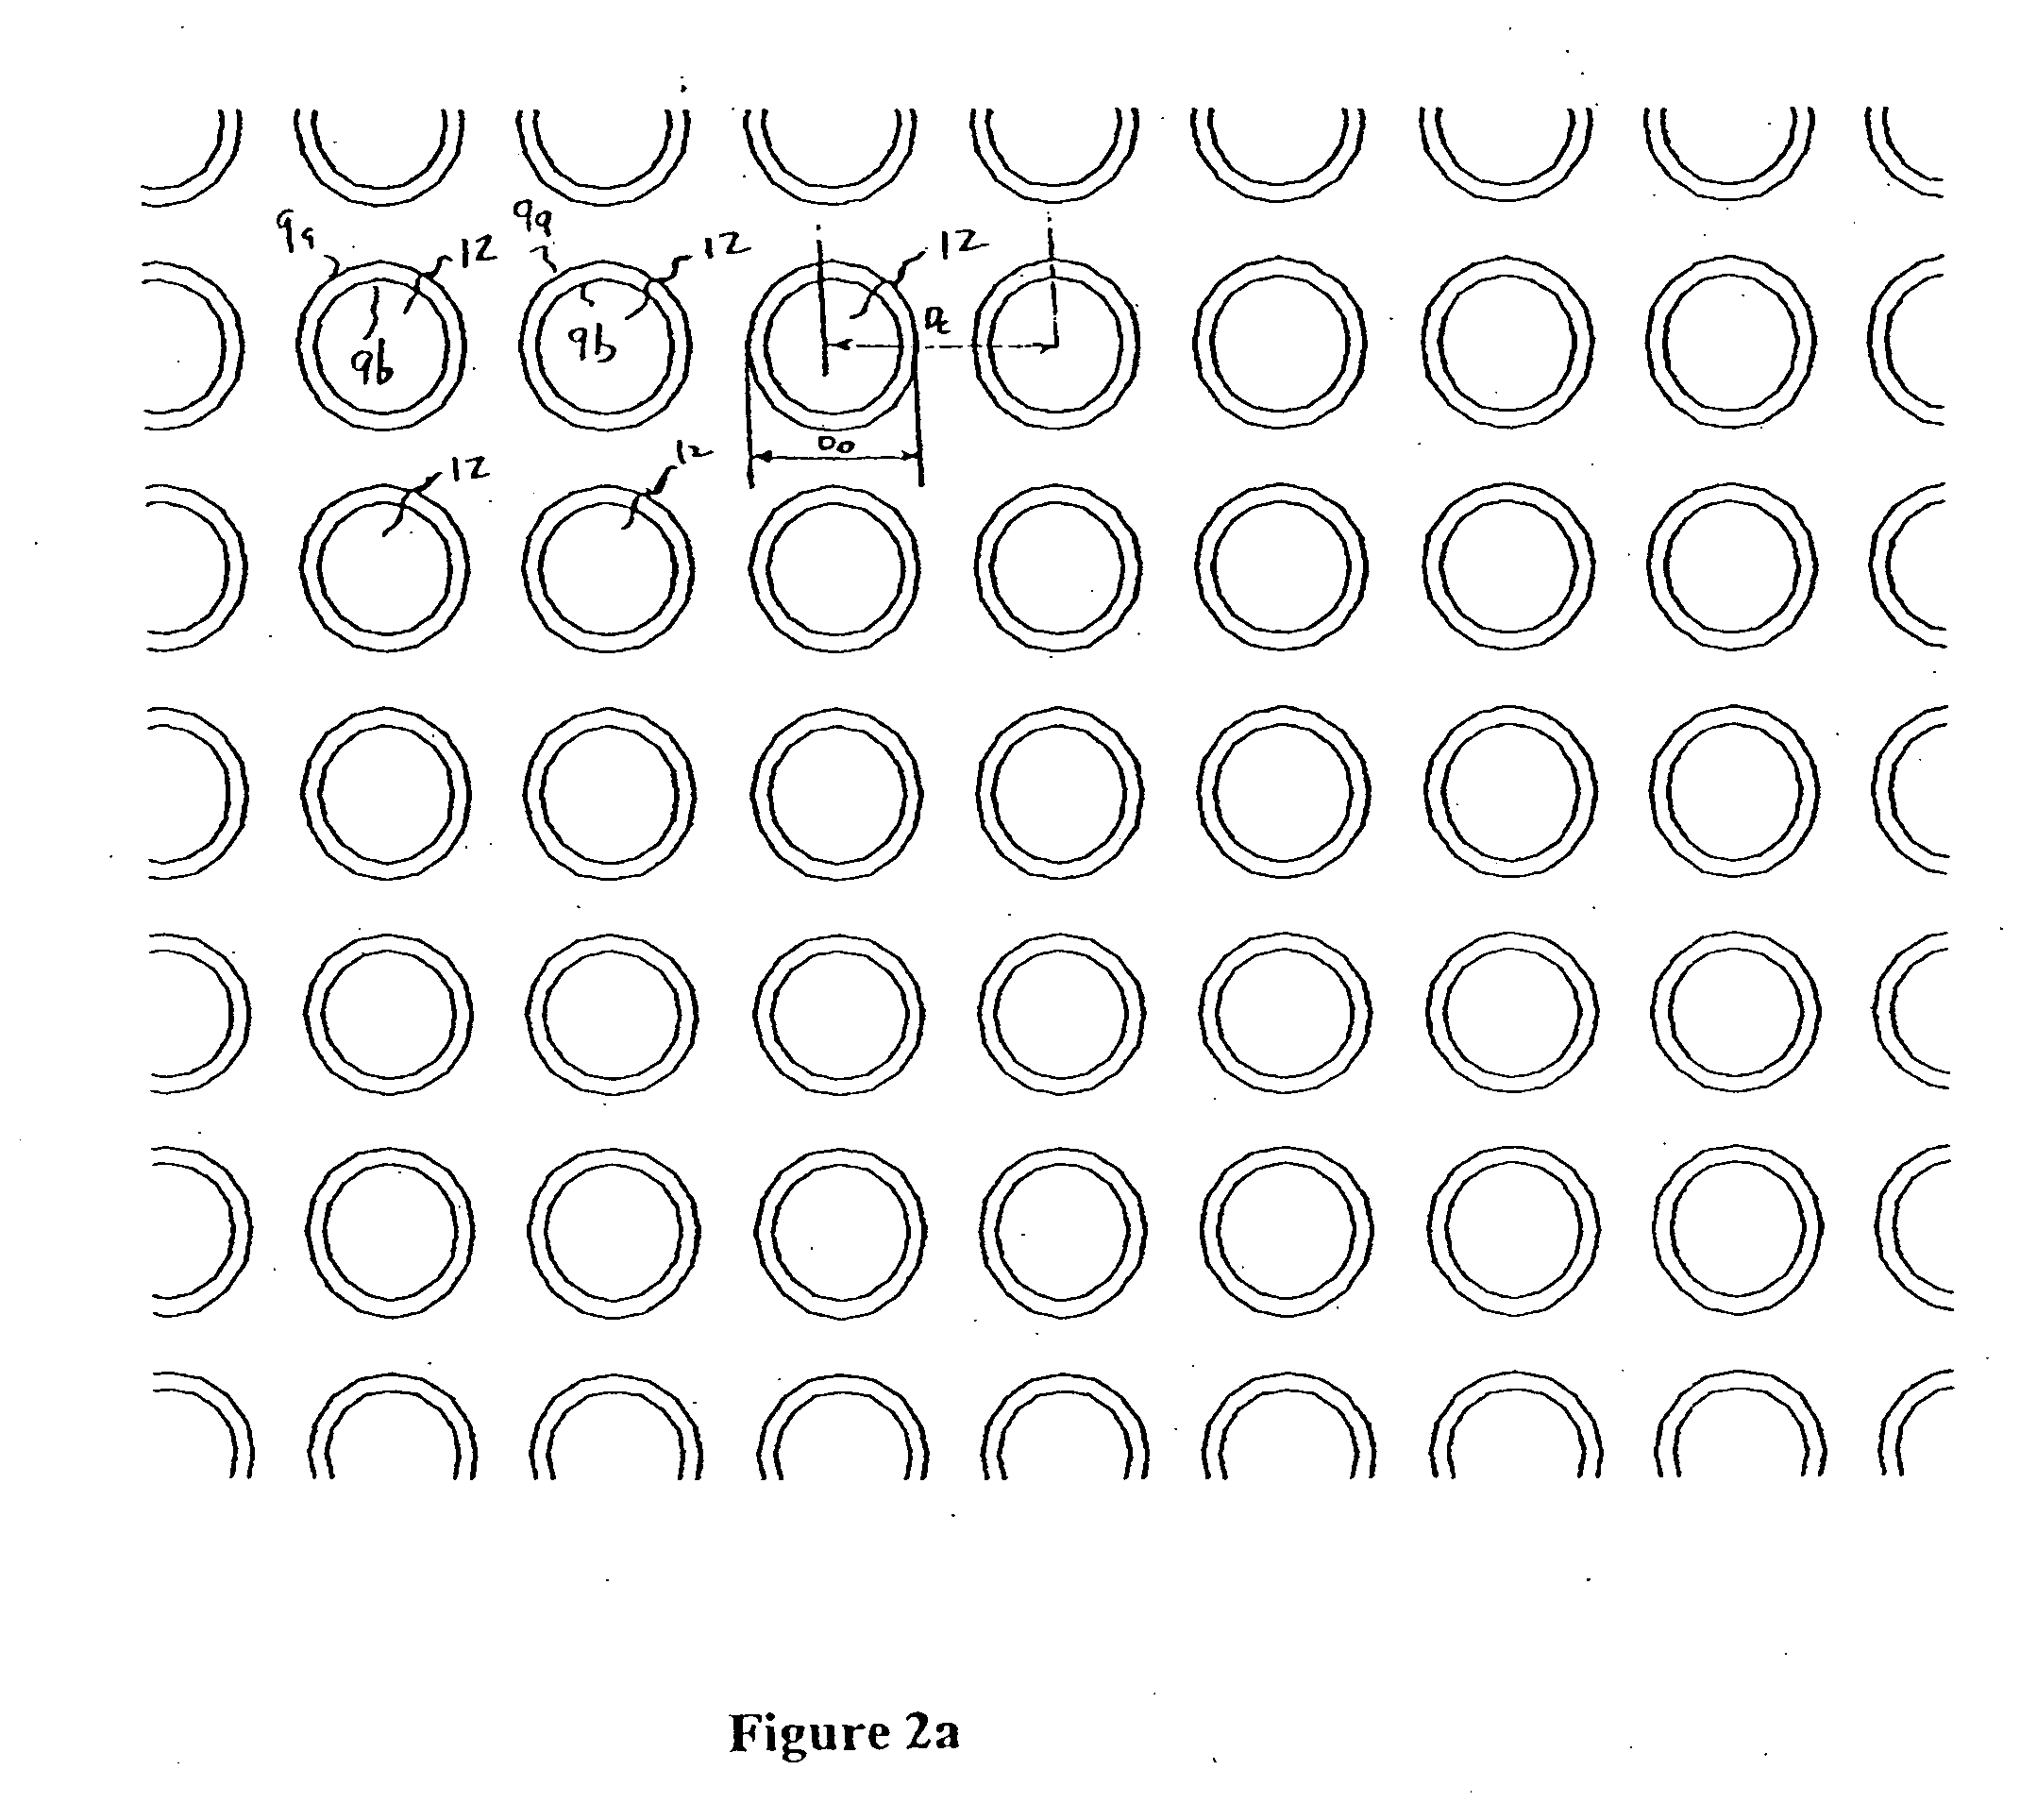 Multi-well plate providing a high-density storage and assay platform